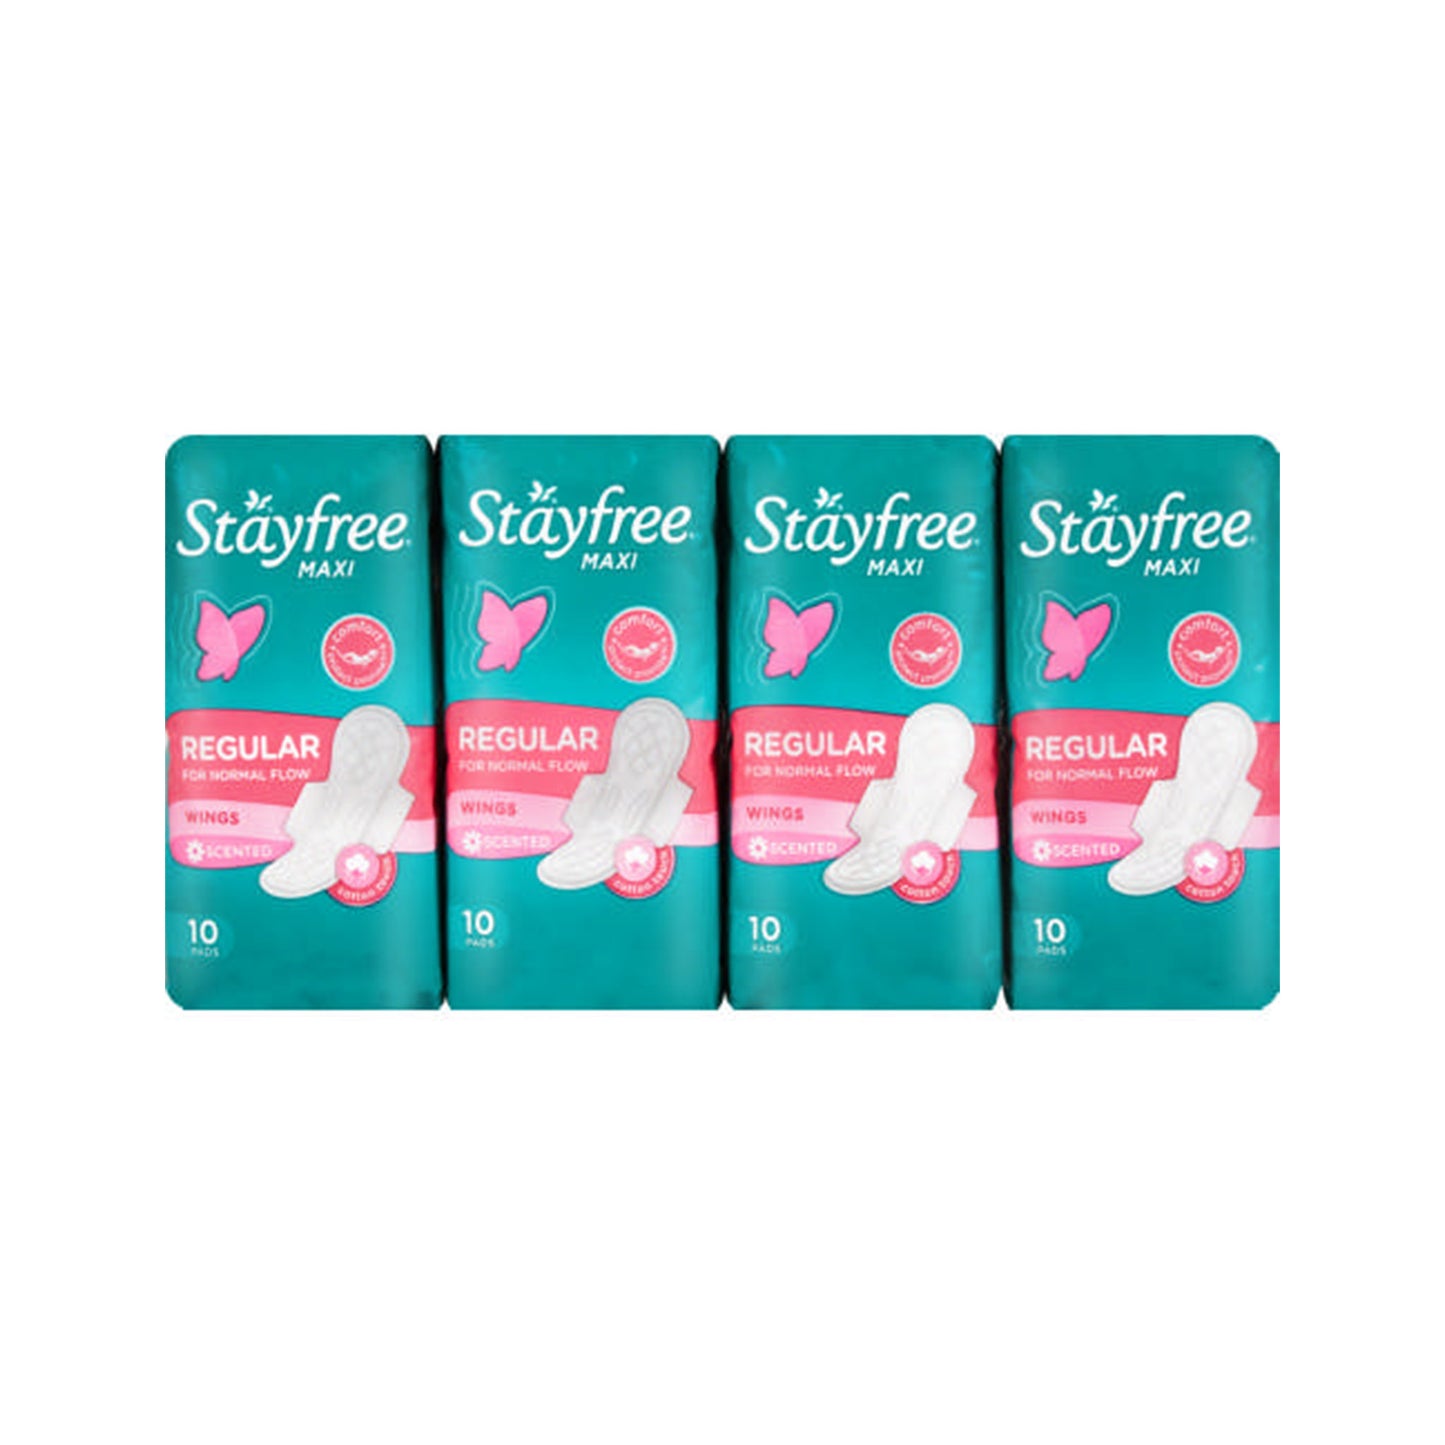 Stayfree Maxi Pads - 4 Pack